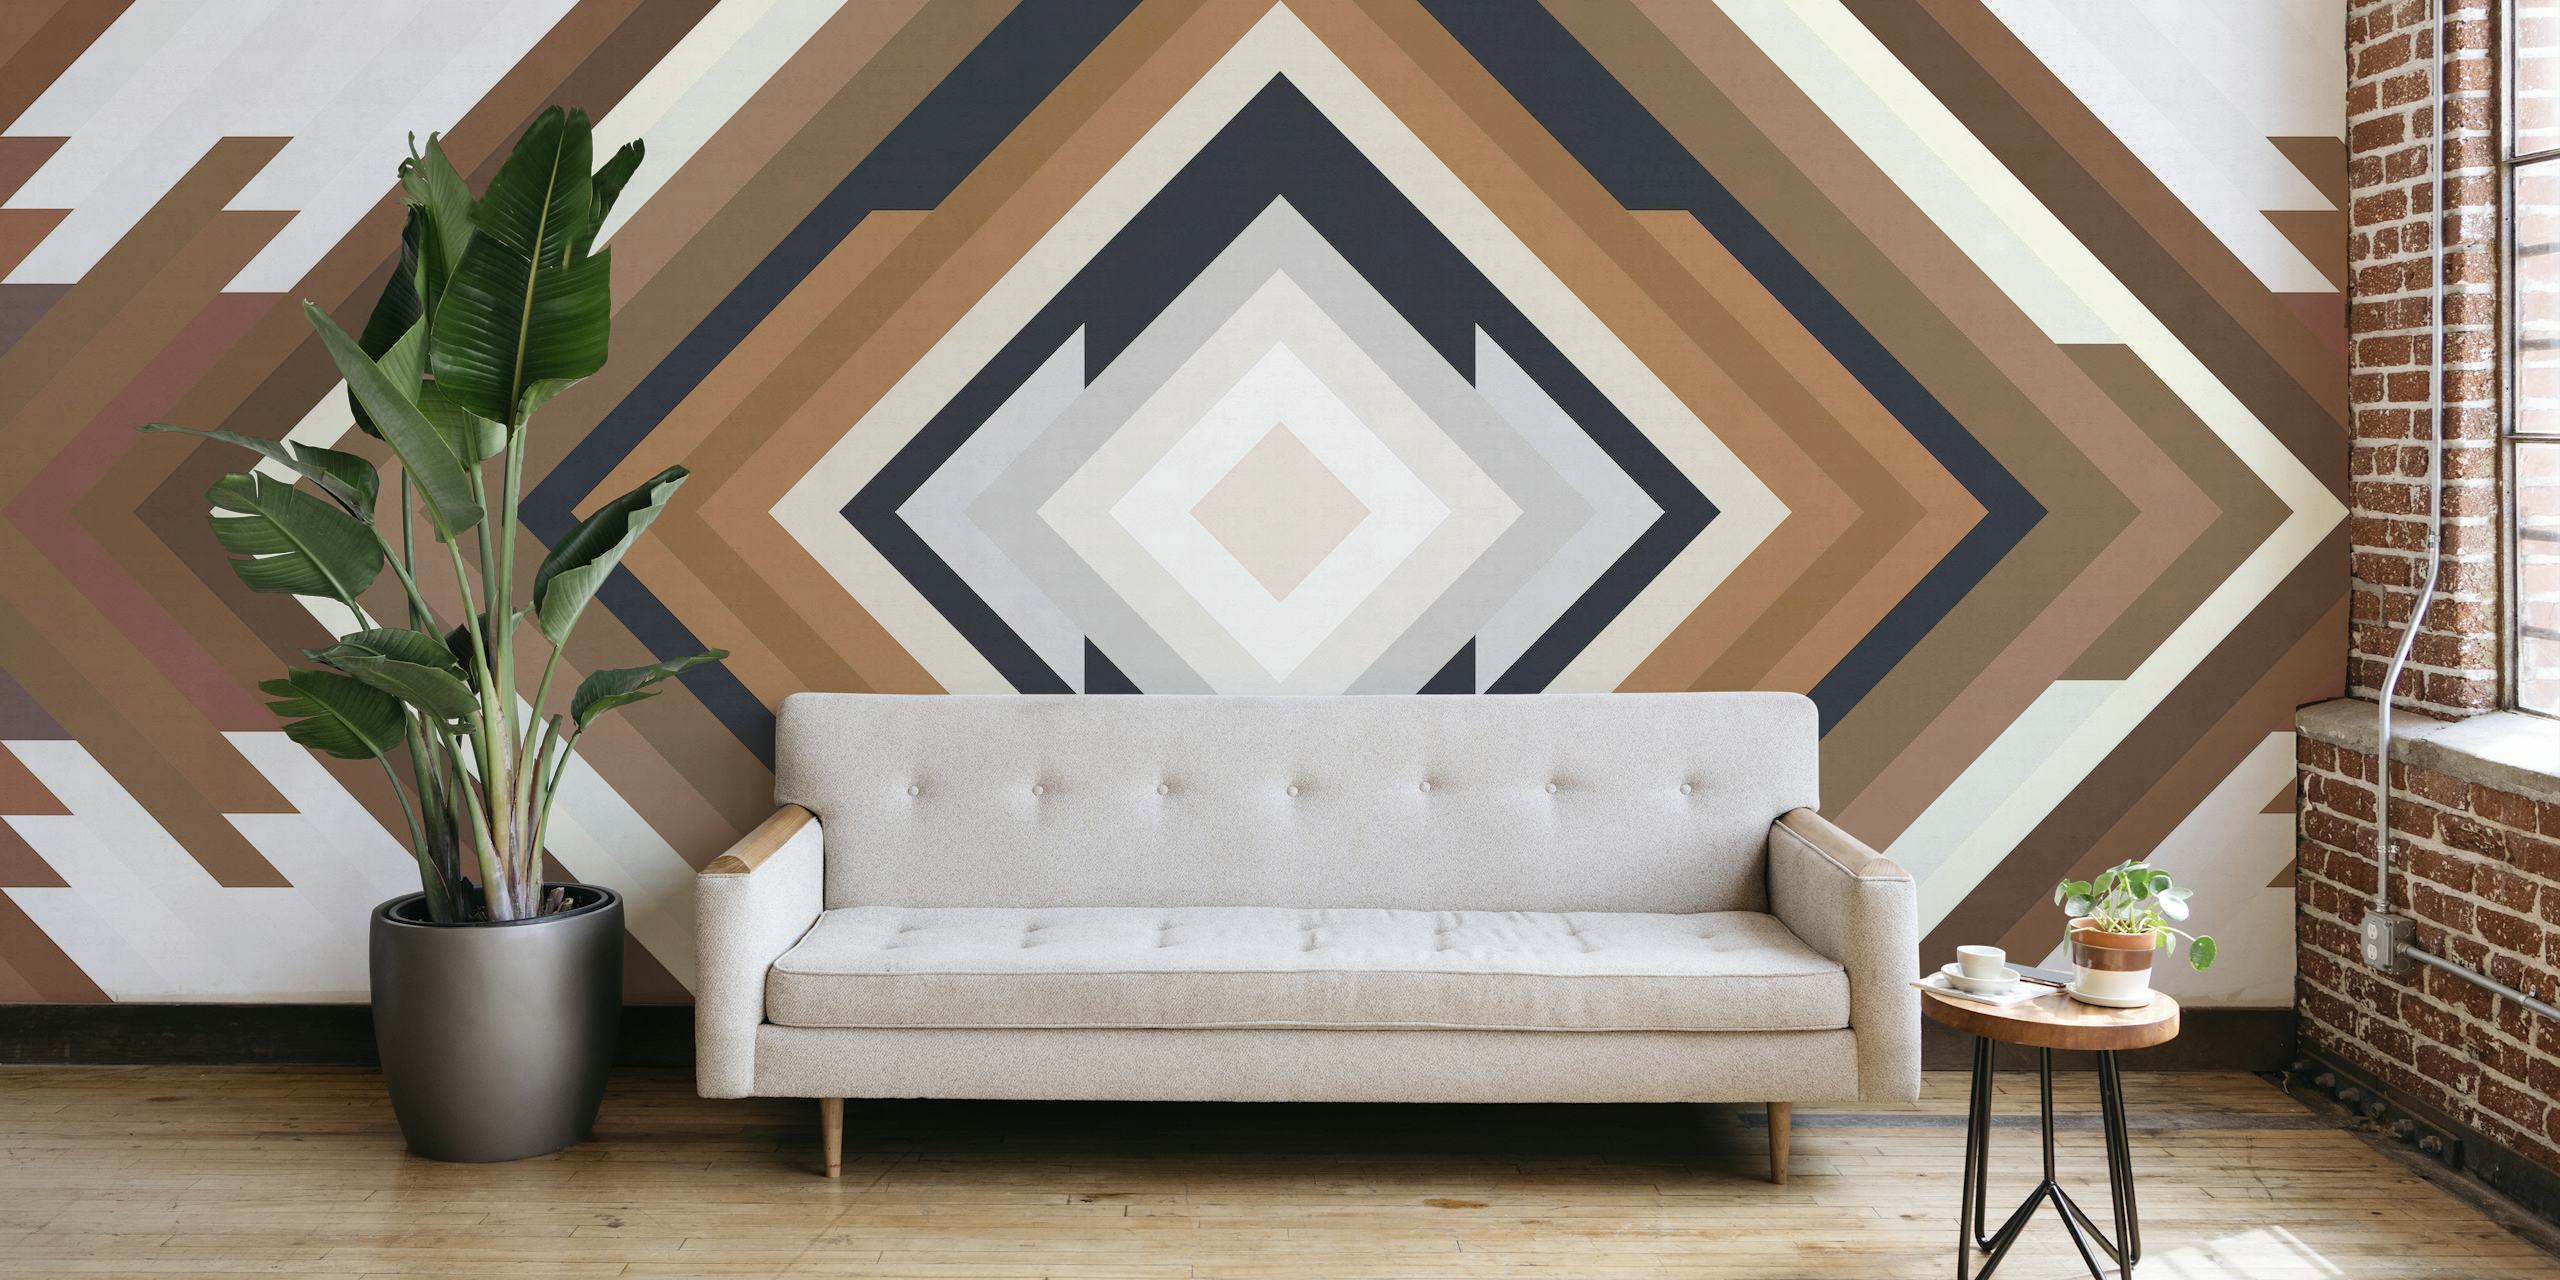 Abstract geometric bands wall mural with warm tones and diamond patterns